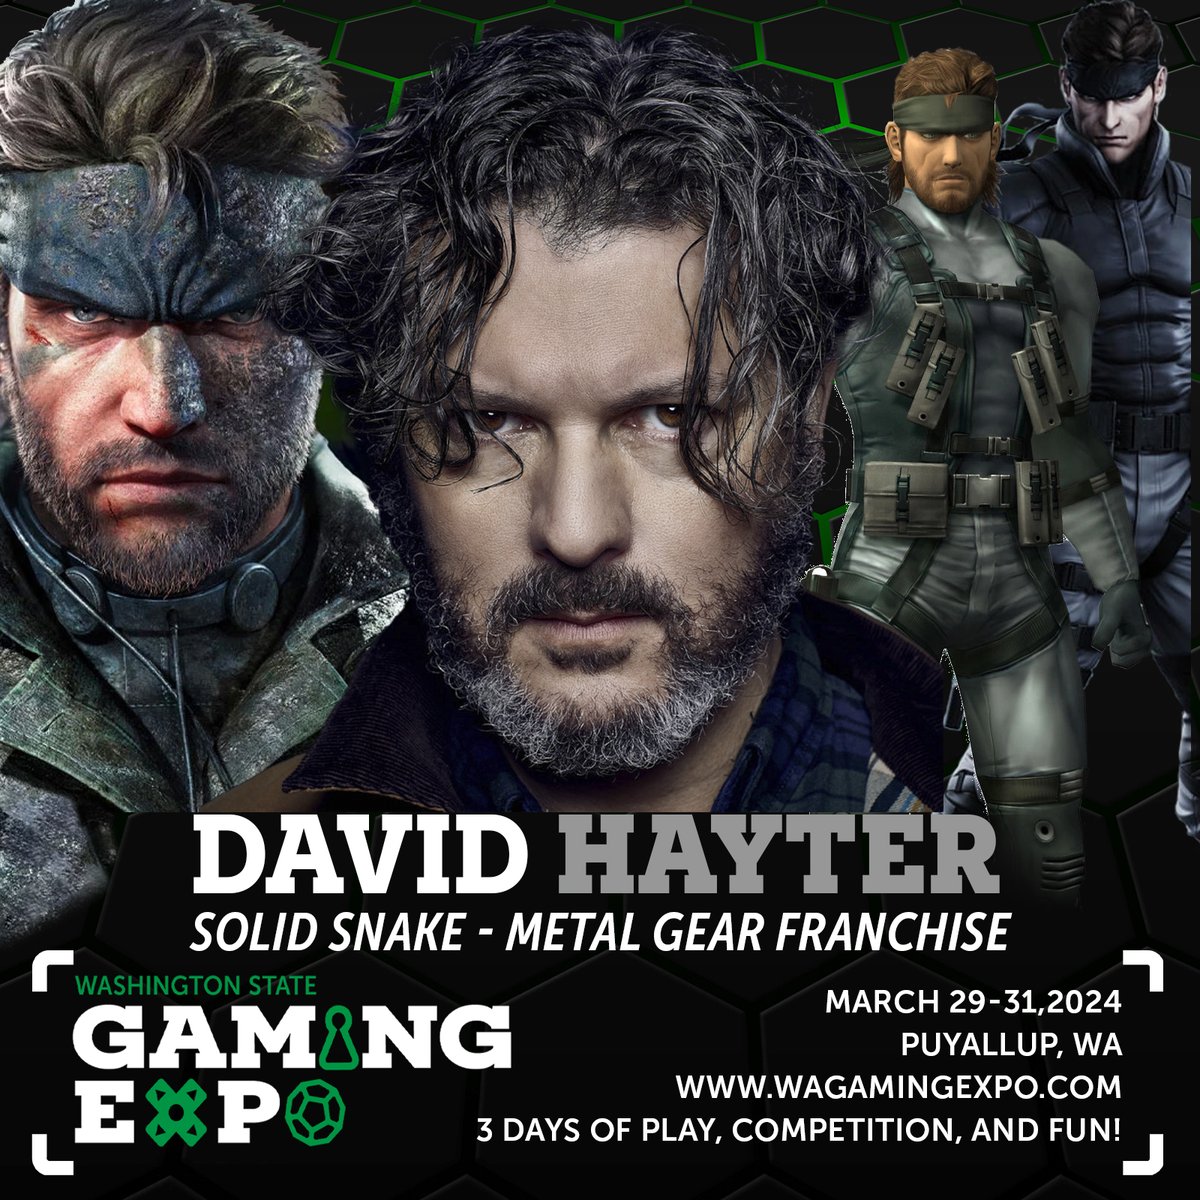 Our final celebrity guest voices one of the most iconic protagonists in video game history. Please welcome the voice behind Solid Snake, David Hayter, to the Washington State Gaming Expo in Puyallup from March 29-31, 2024. Get your tickets now: wagamingexpo.com